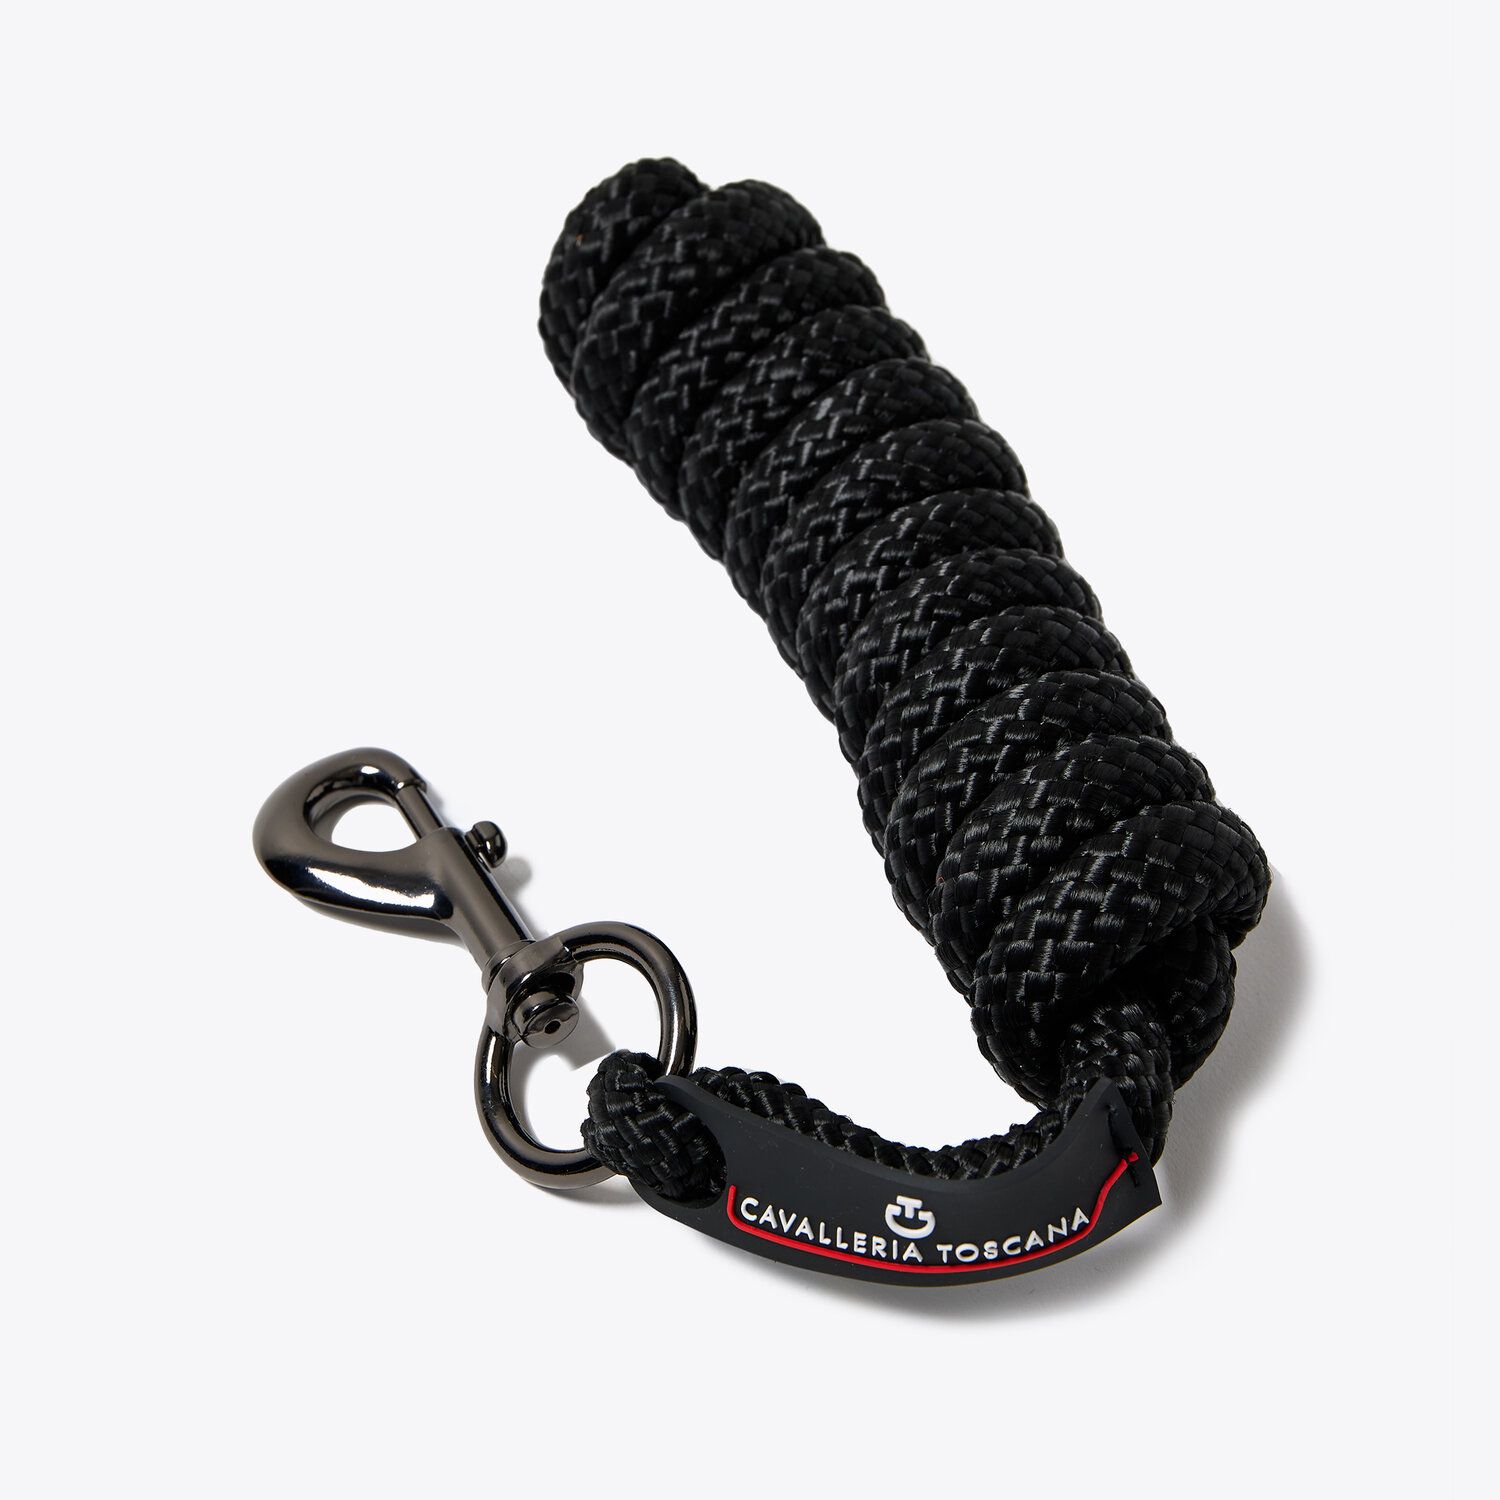 Cavalleria Toscana Lead rope with carabiner BLACK-1